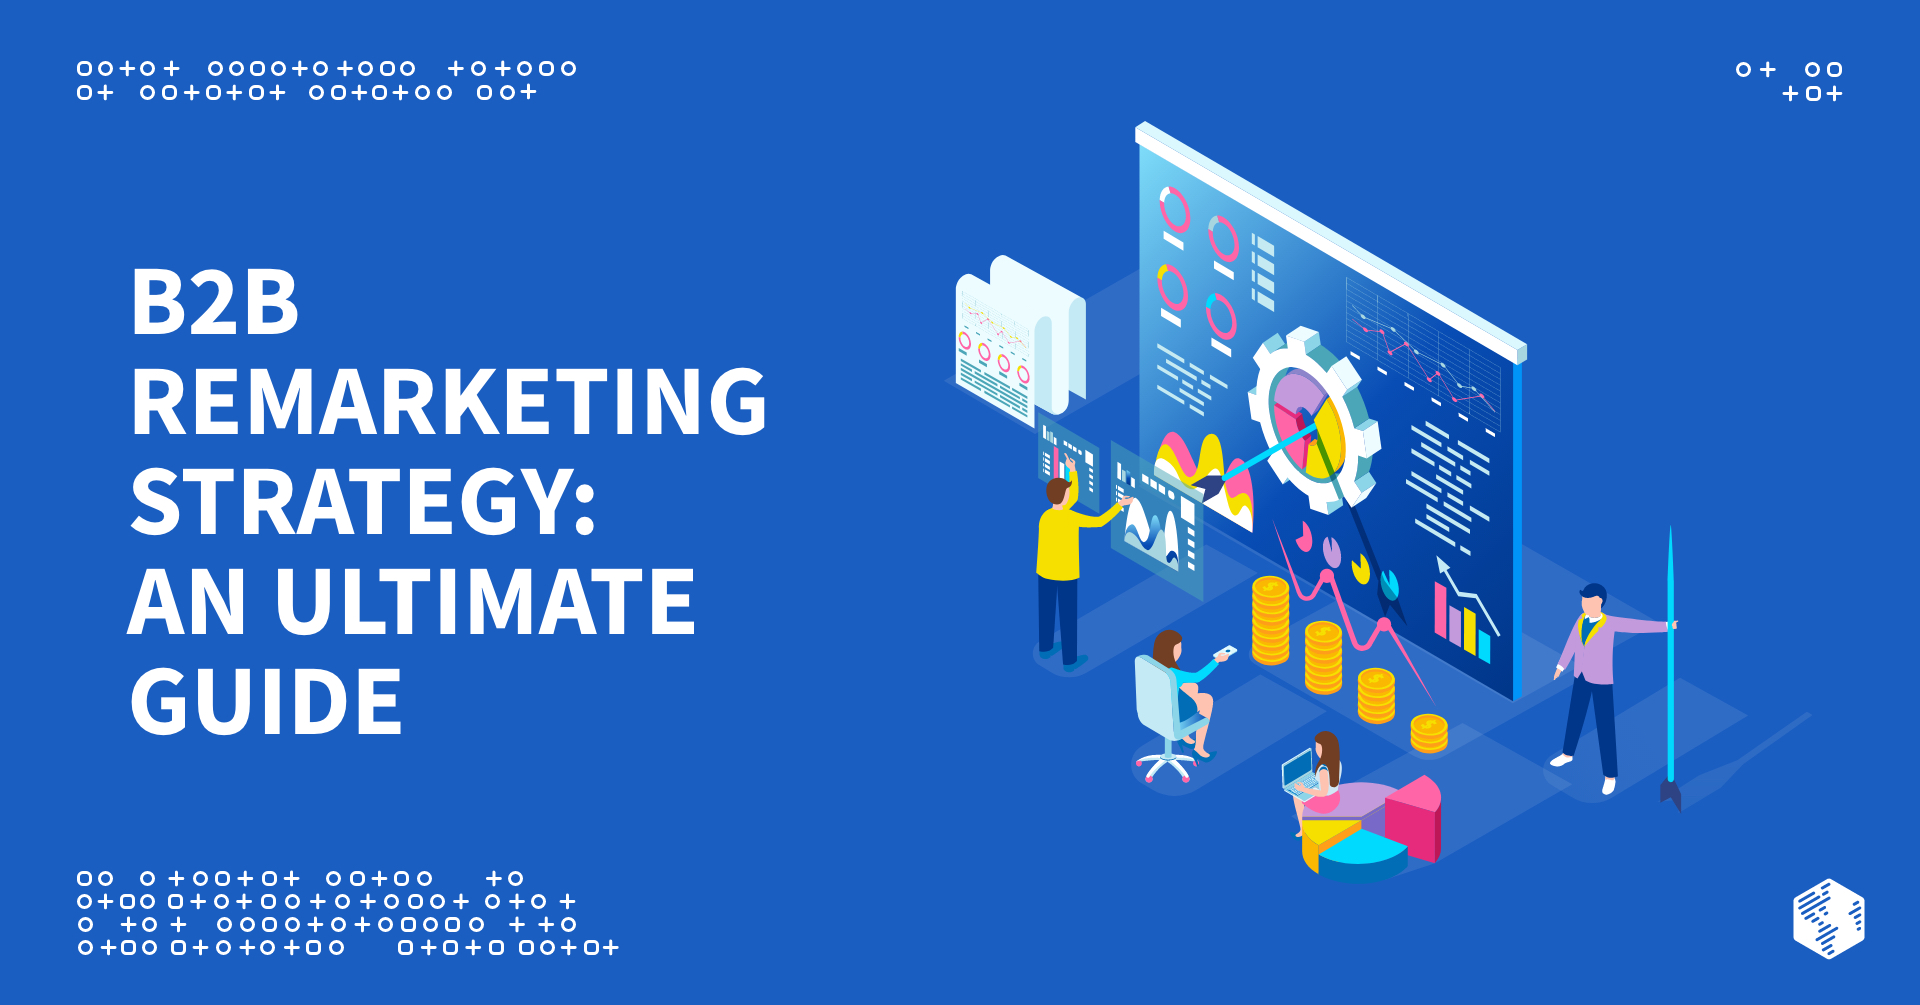 B2B Remarketing Strategy: An Ultimate Guide